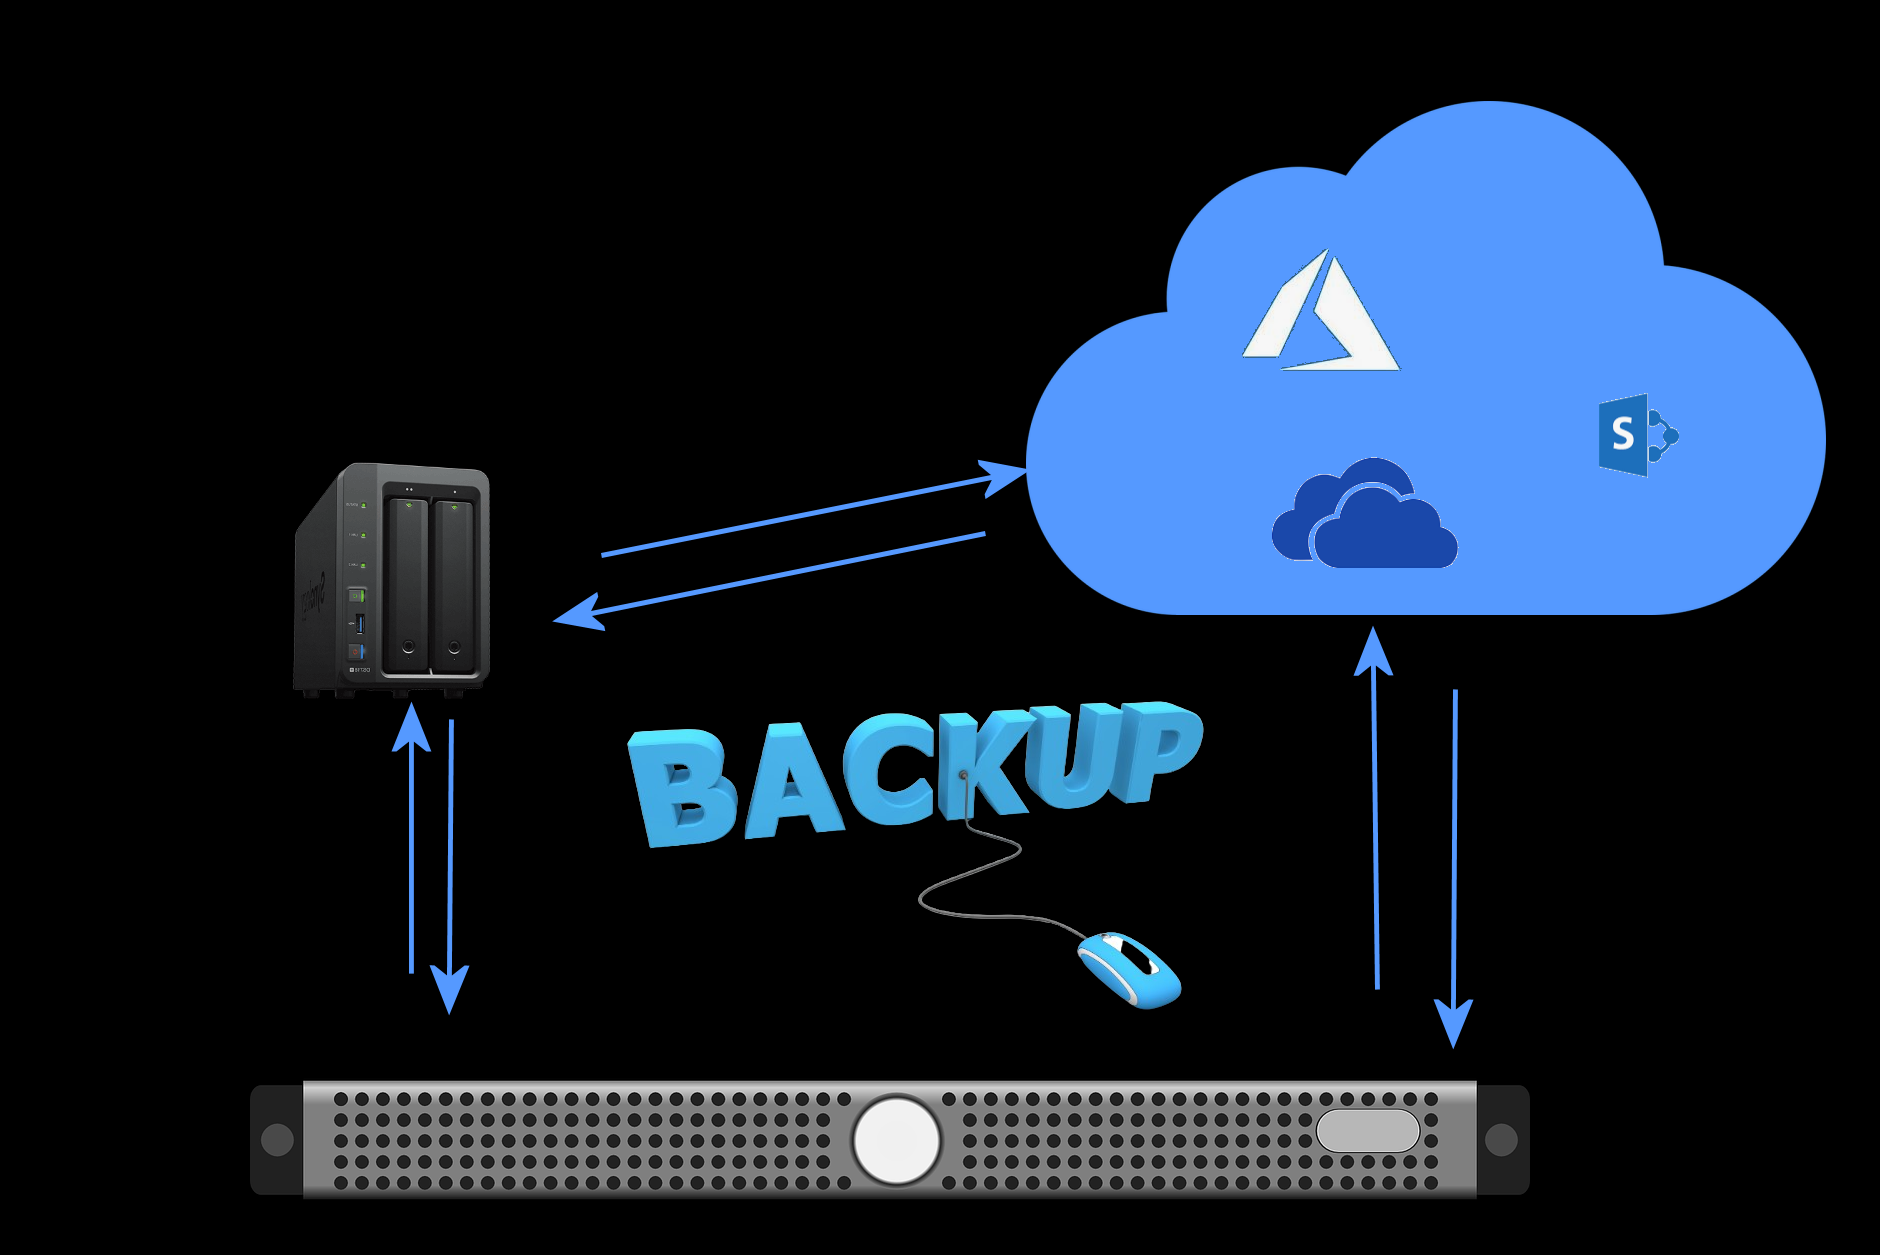 Backup in azure with a cloud and a computer.